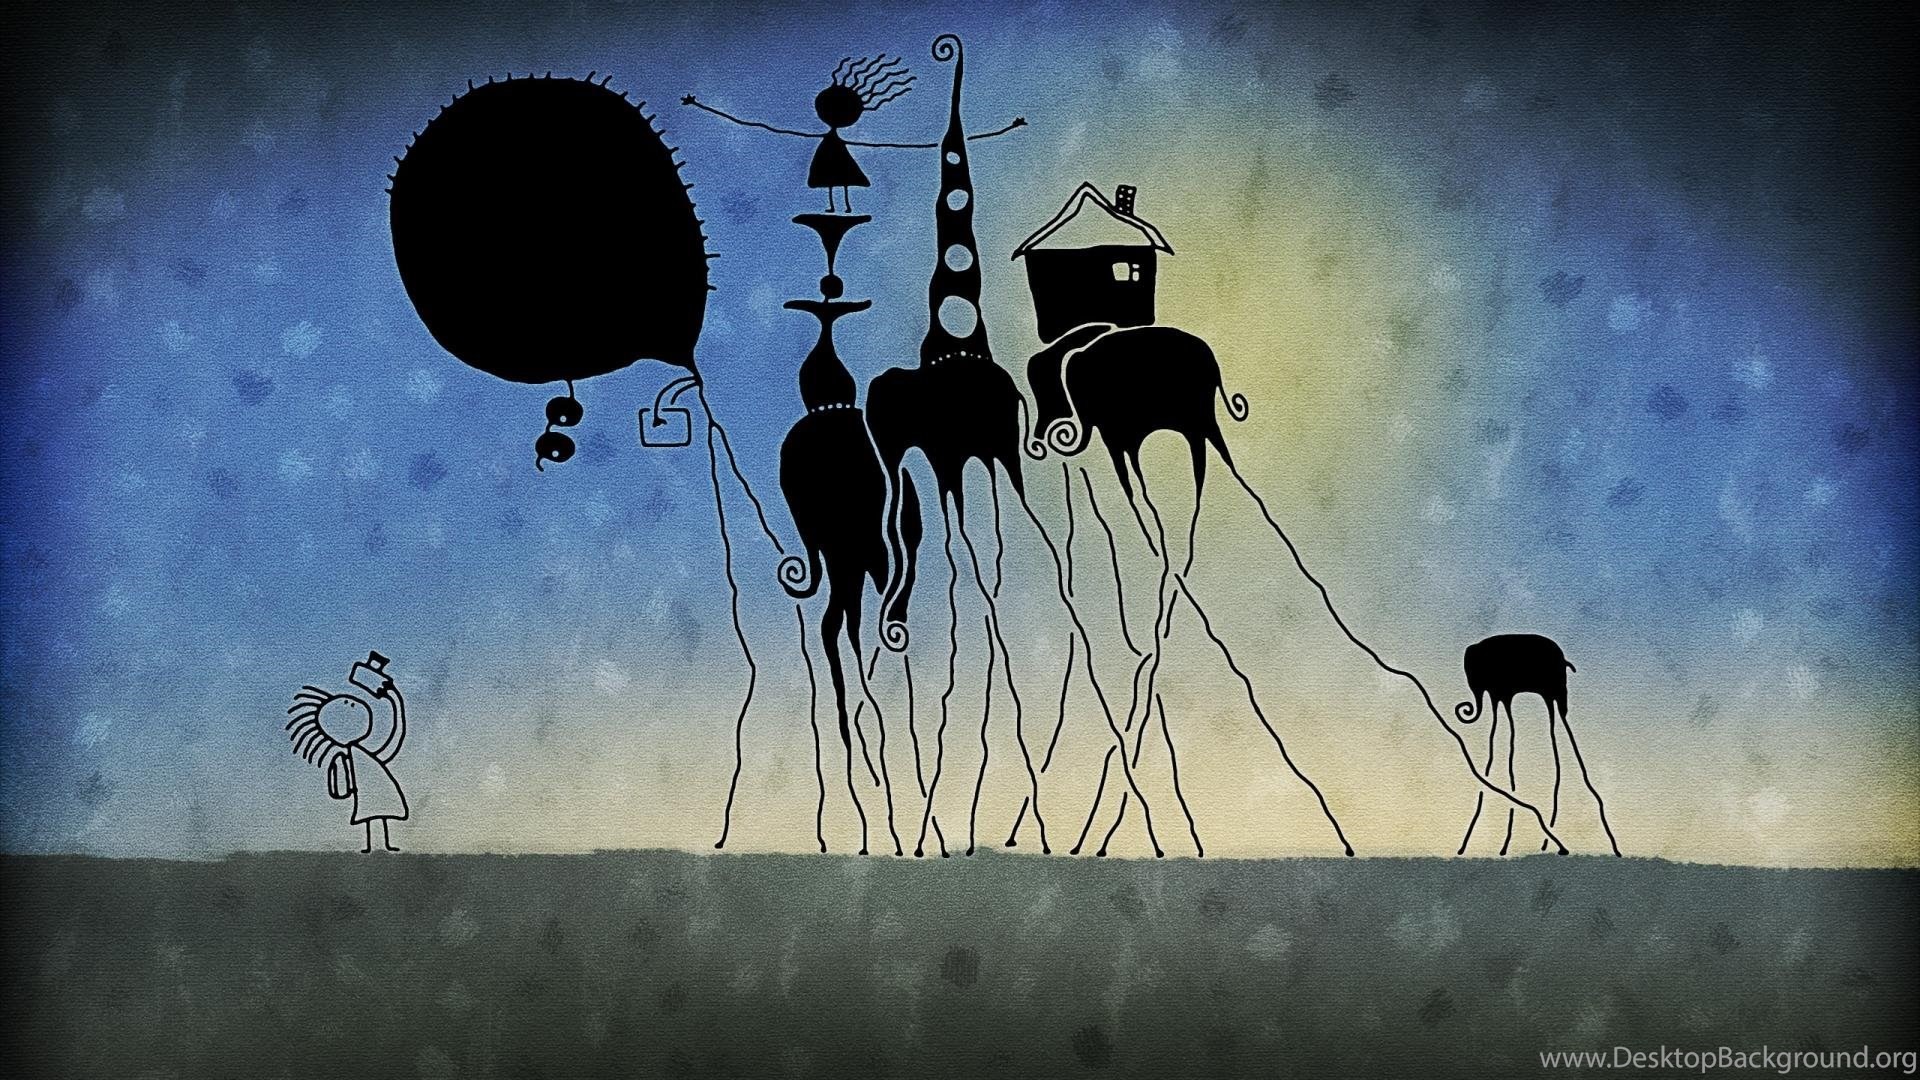 1920x1080 Surreal Backgrounds Hd Wallpapers (